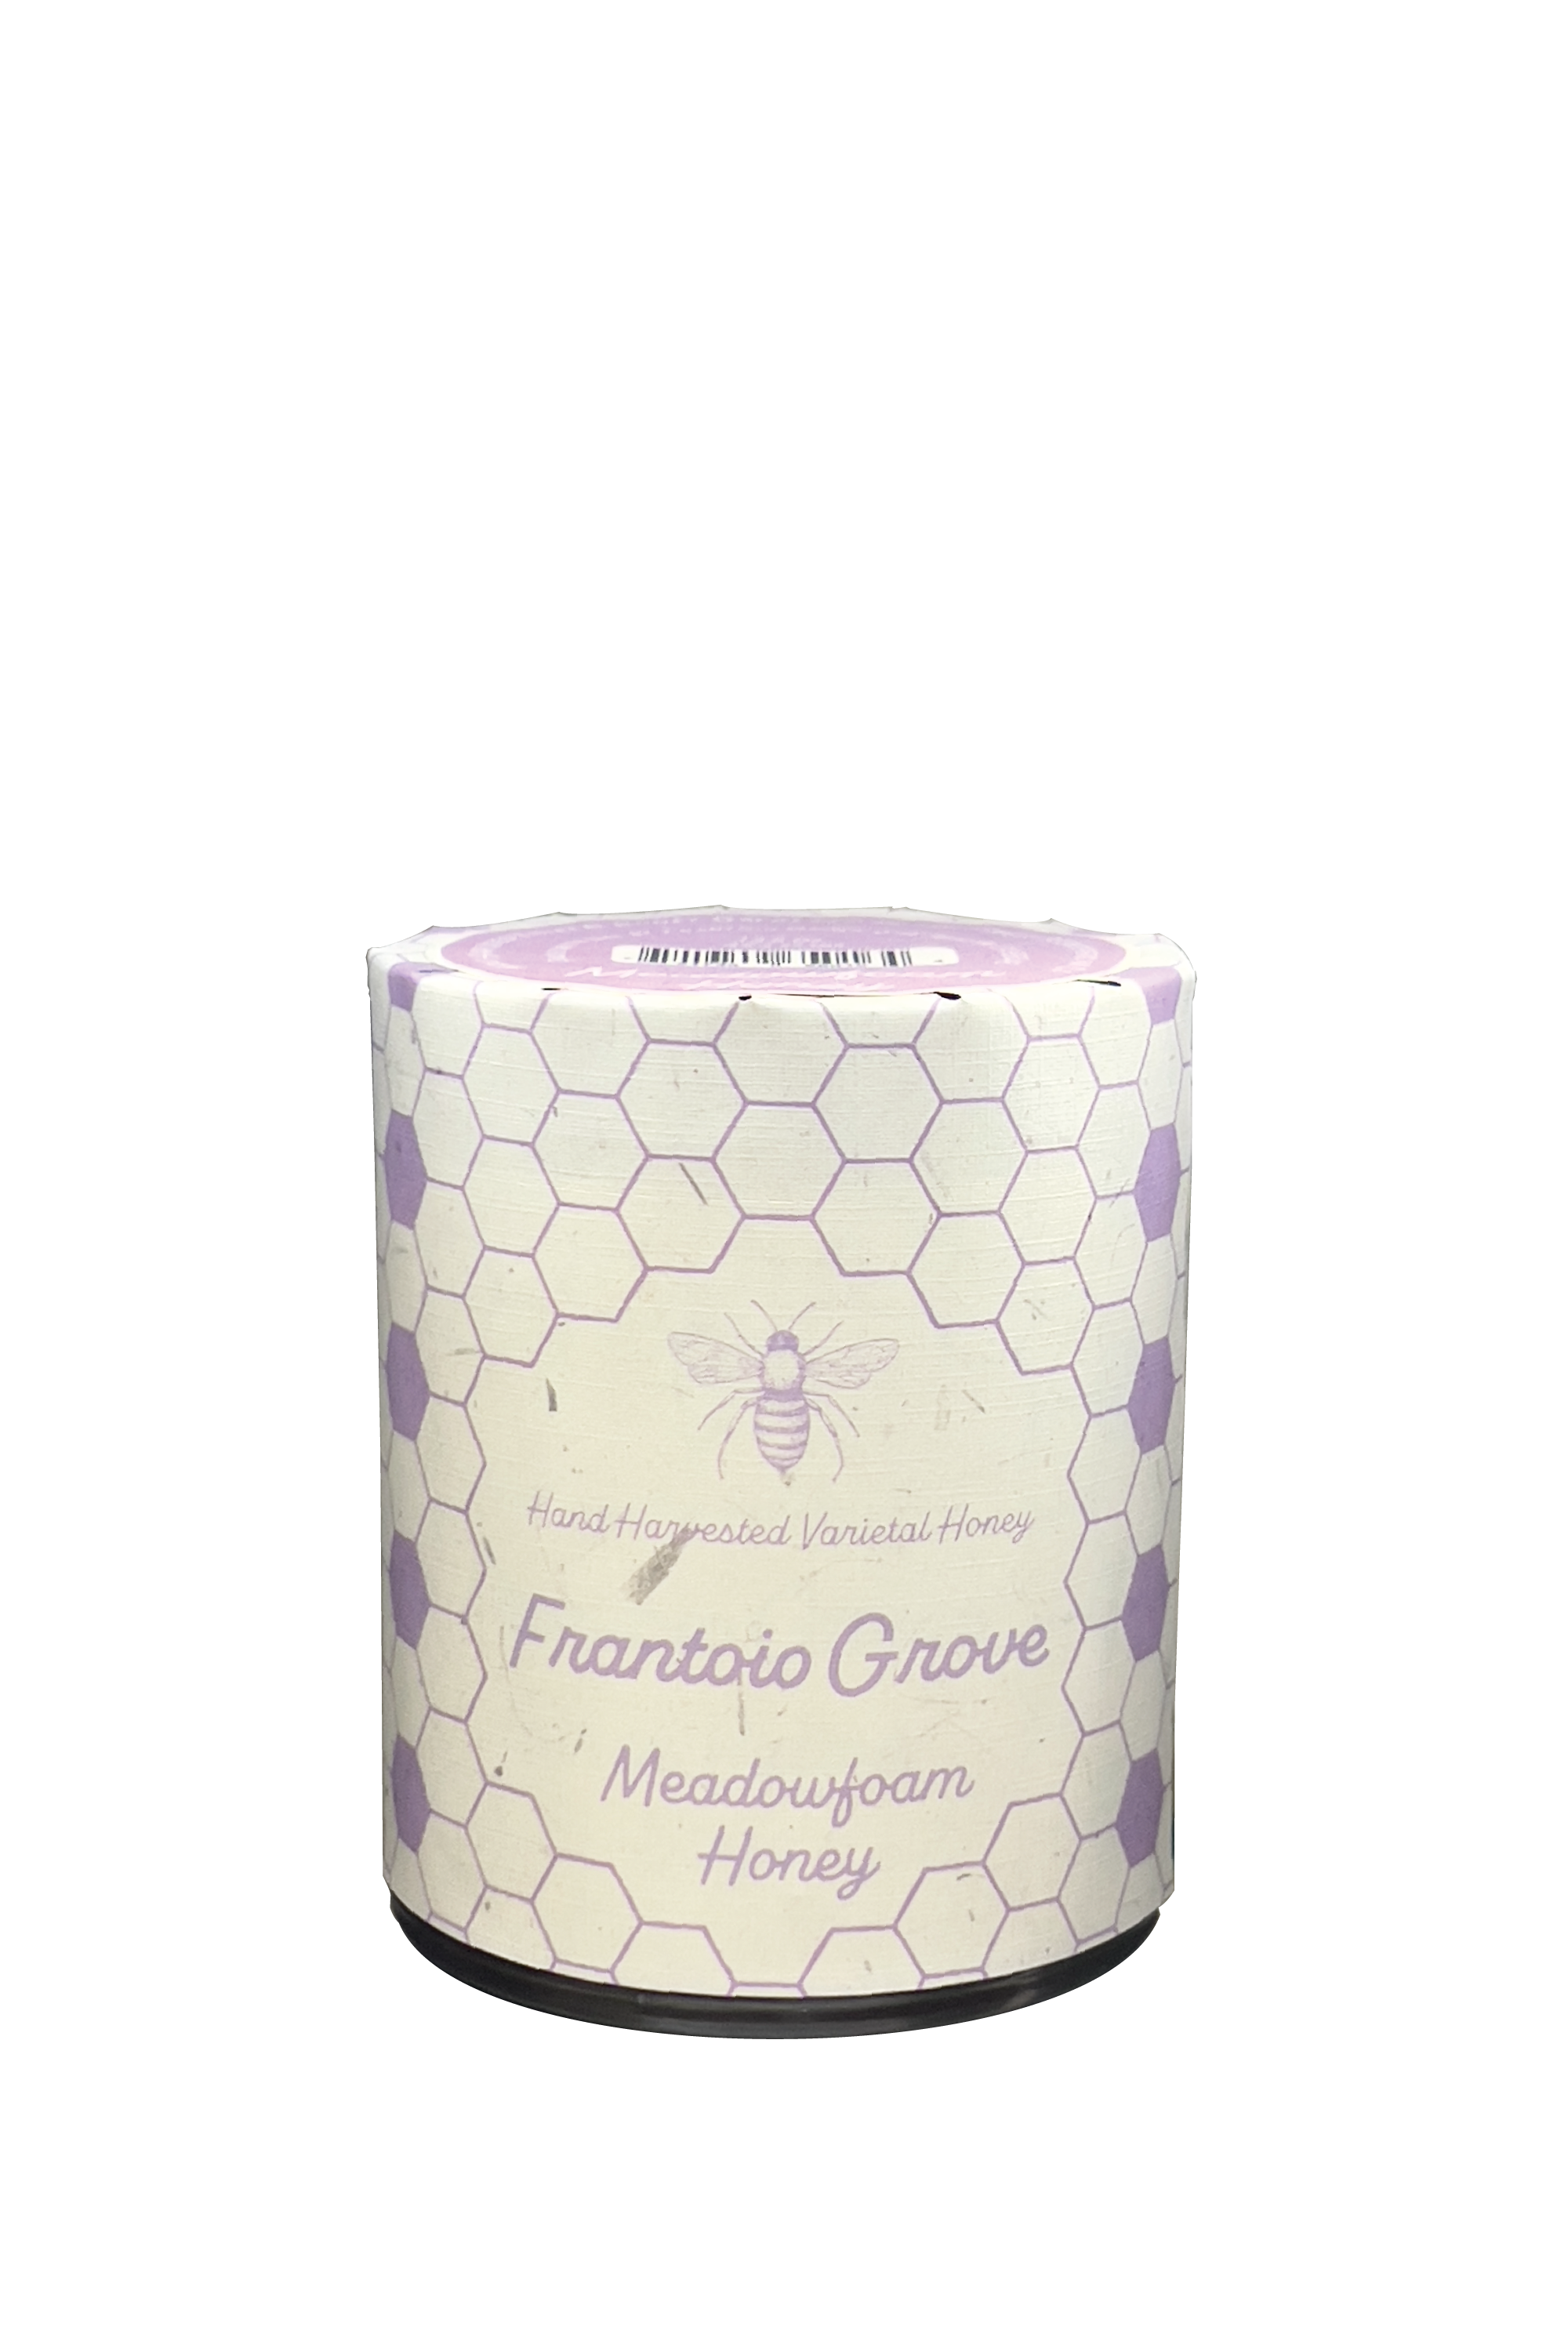 Image of a jar of Frantoio Grove's hand harvested Meadowfoam Honey on a White Background. Jar is wrapped in white paper with art depicting a bee and a pattern of alternating lavender and white honeycomb.